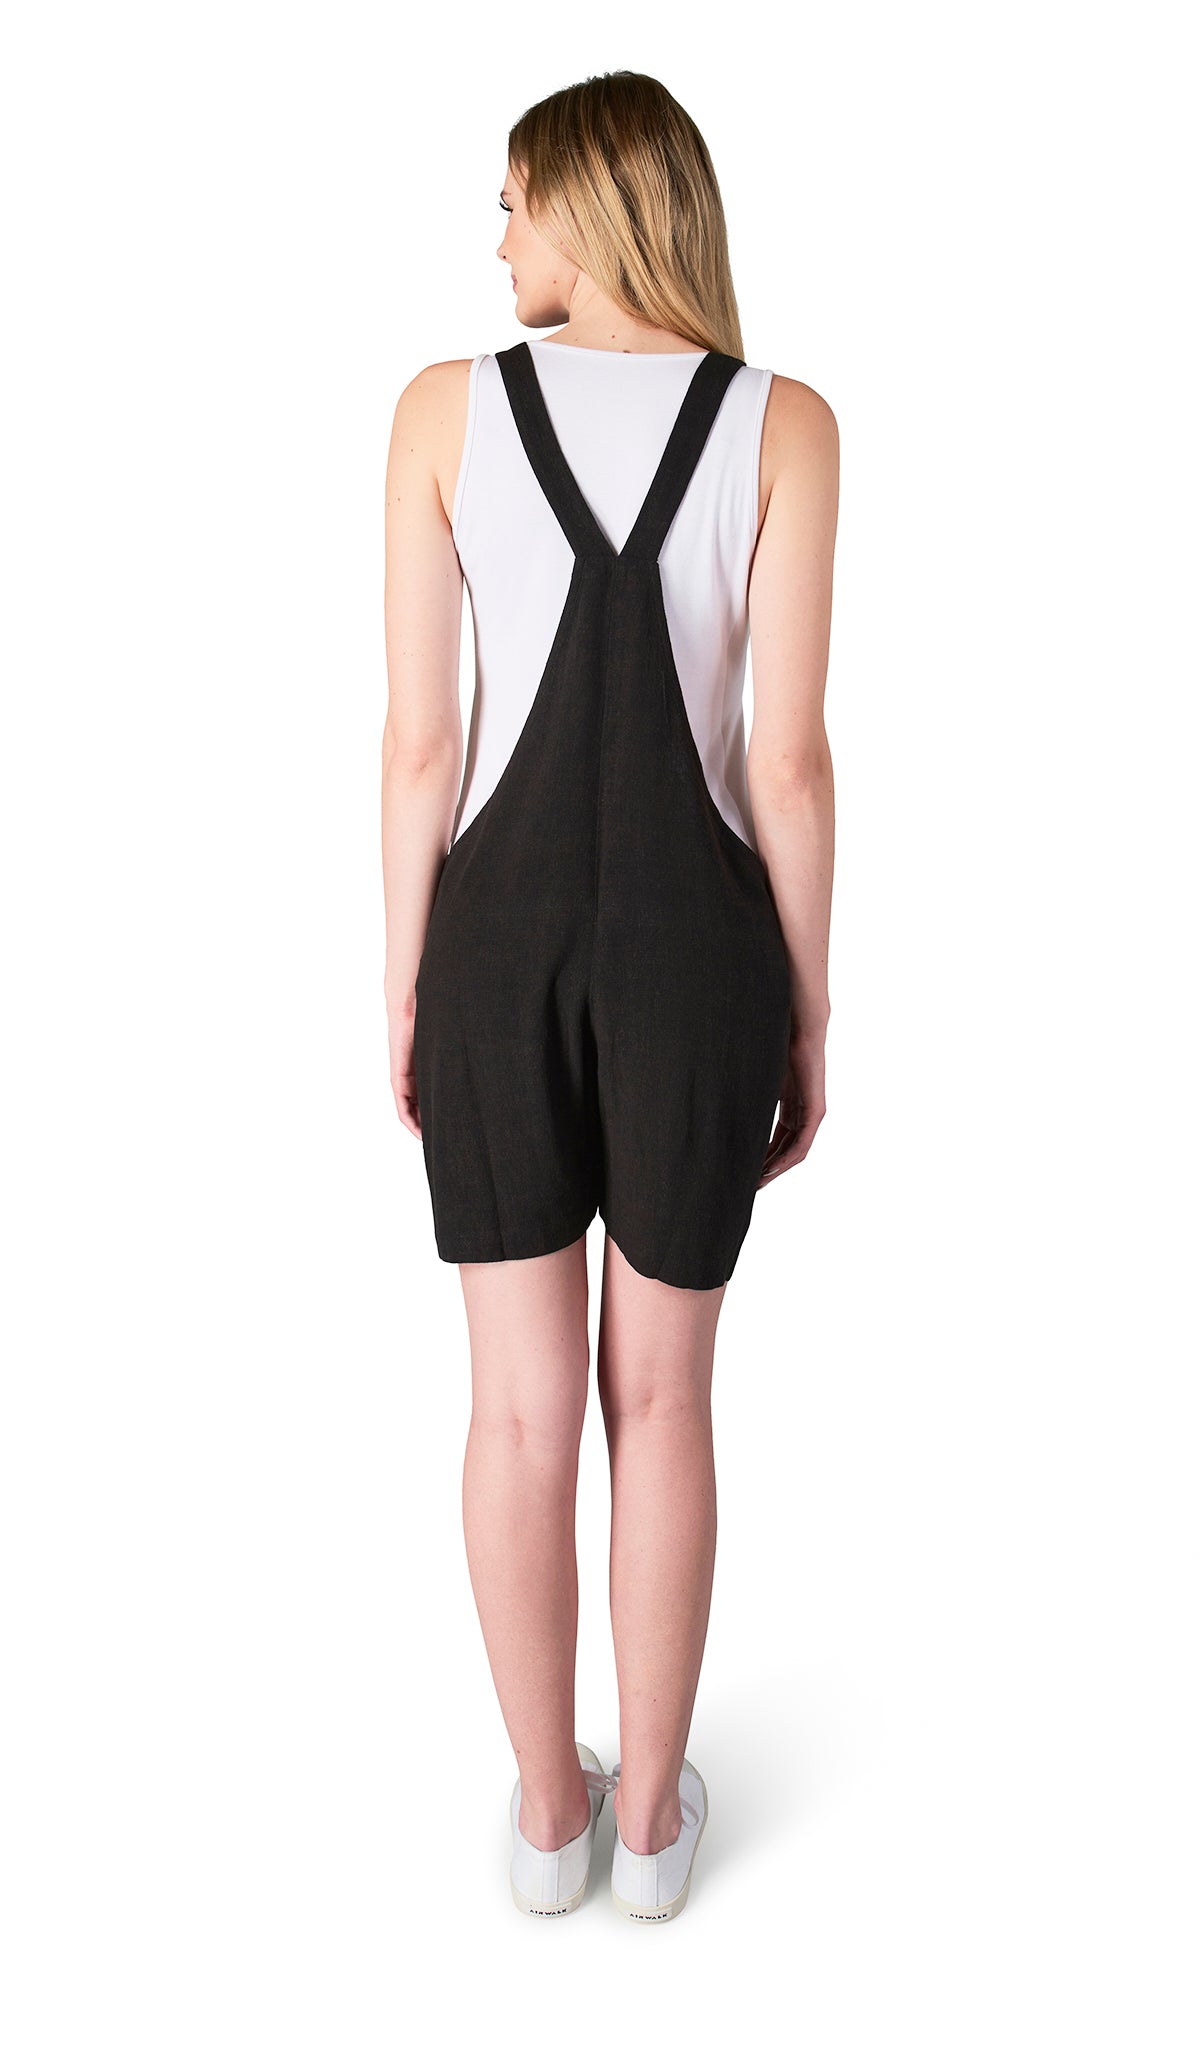 Black Jodi overall back shot worn by woman with white tank top layered underneath.